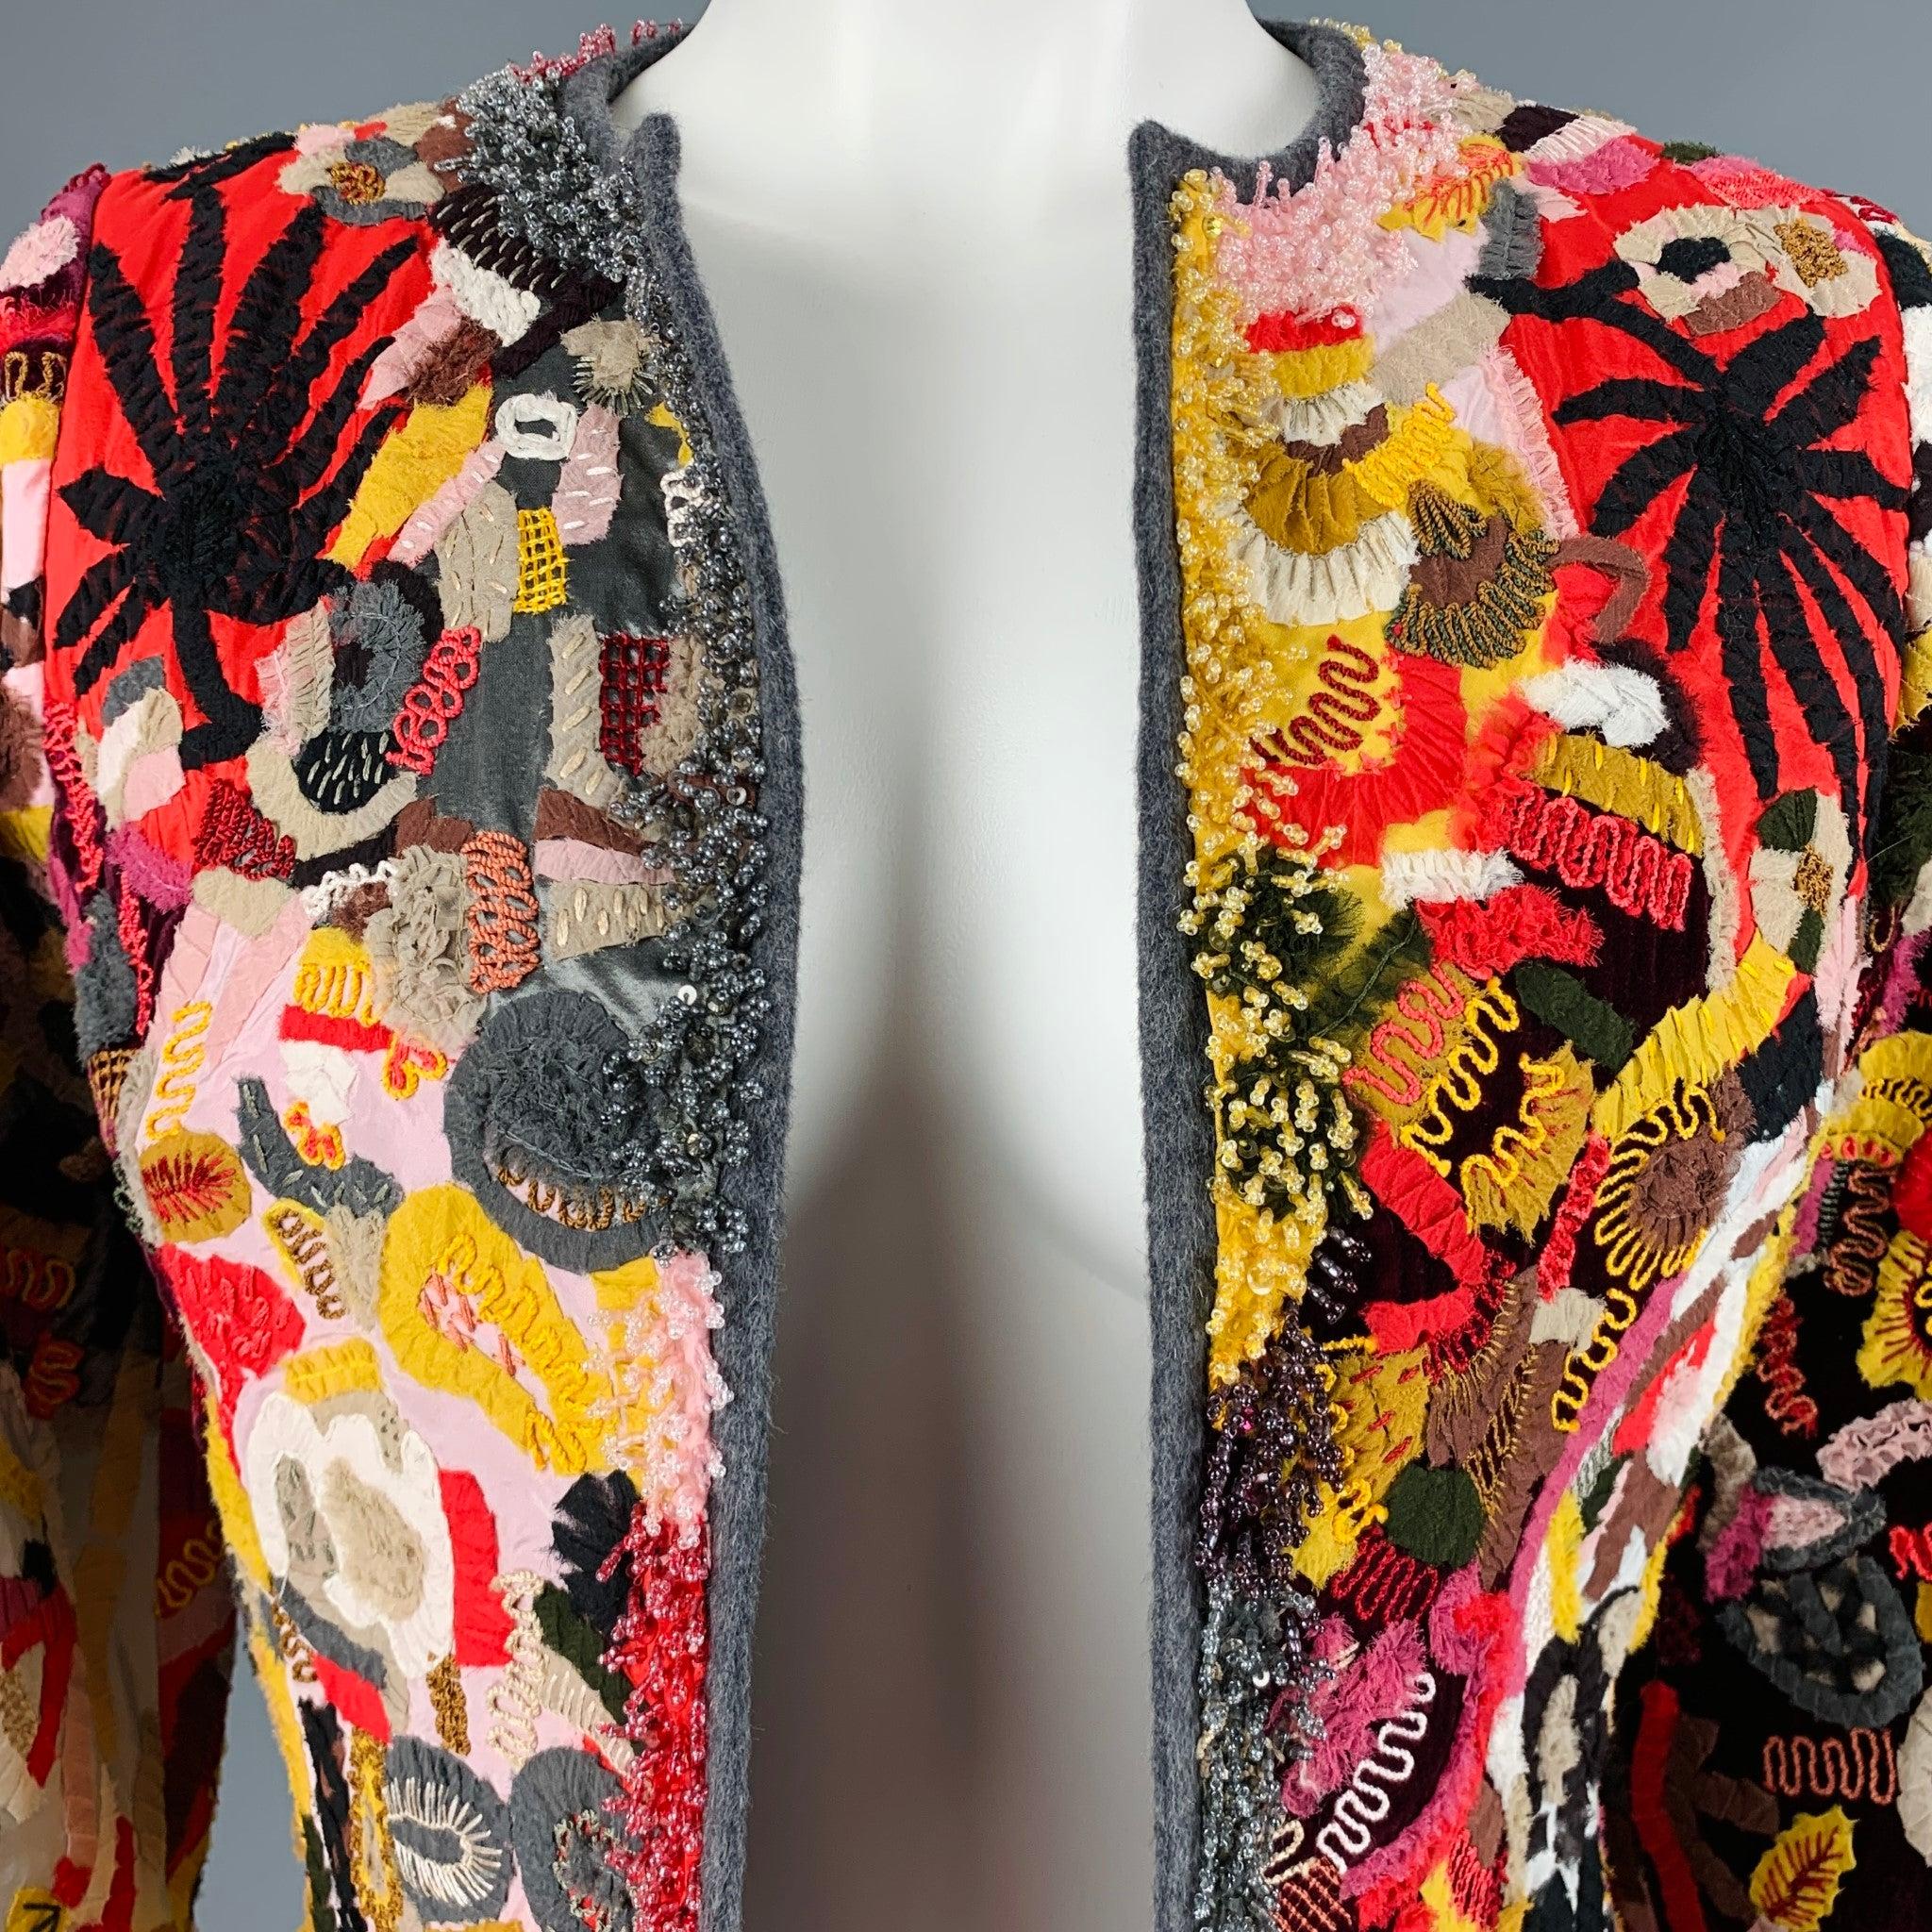 OSCAR DE LA RENTA jacket
in a yellow and red virgin wool blend fabric with velvet rayon silk lining, featuring vibrant eclectic abstract pattern, colorful ribbon details, beaded trim, and open front. Made in USA.Excellent Pre-Owned Condition.